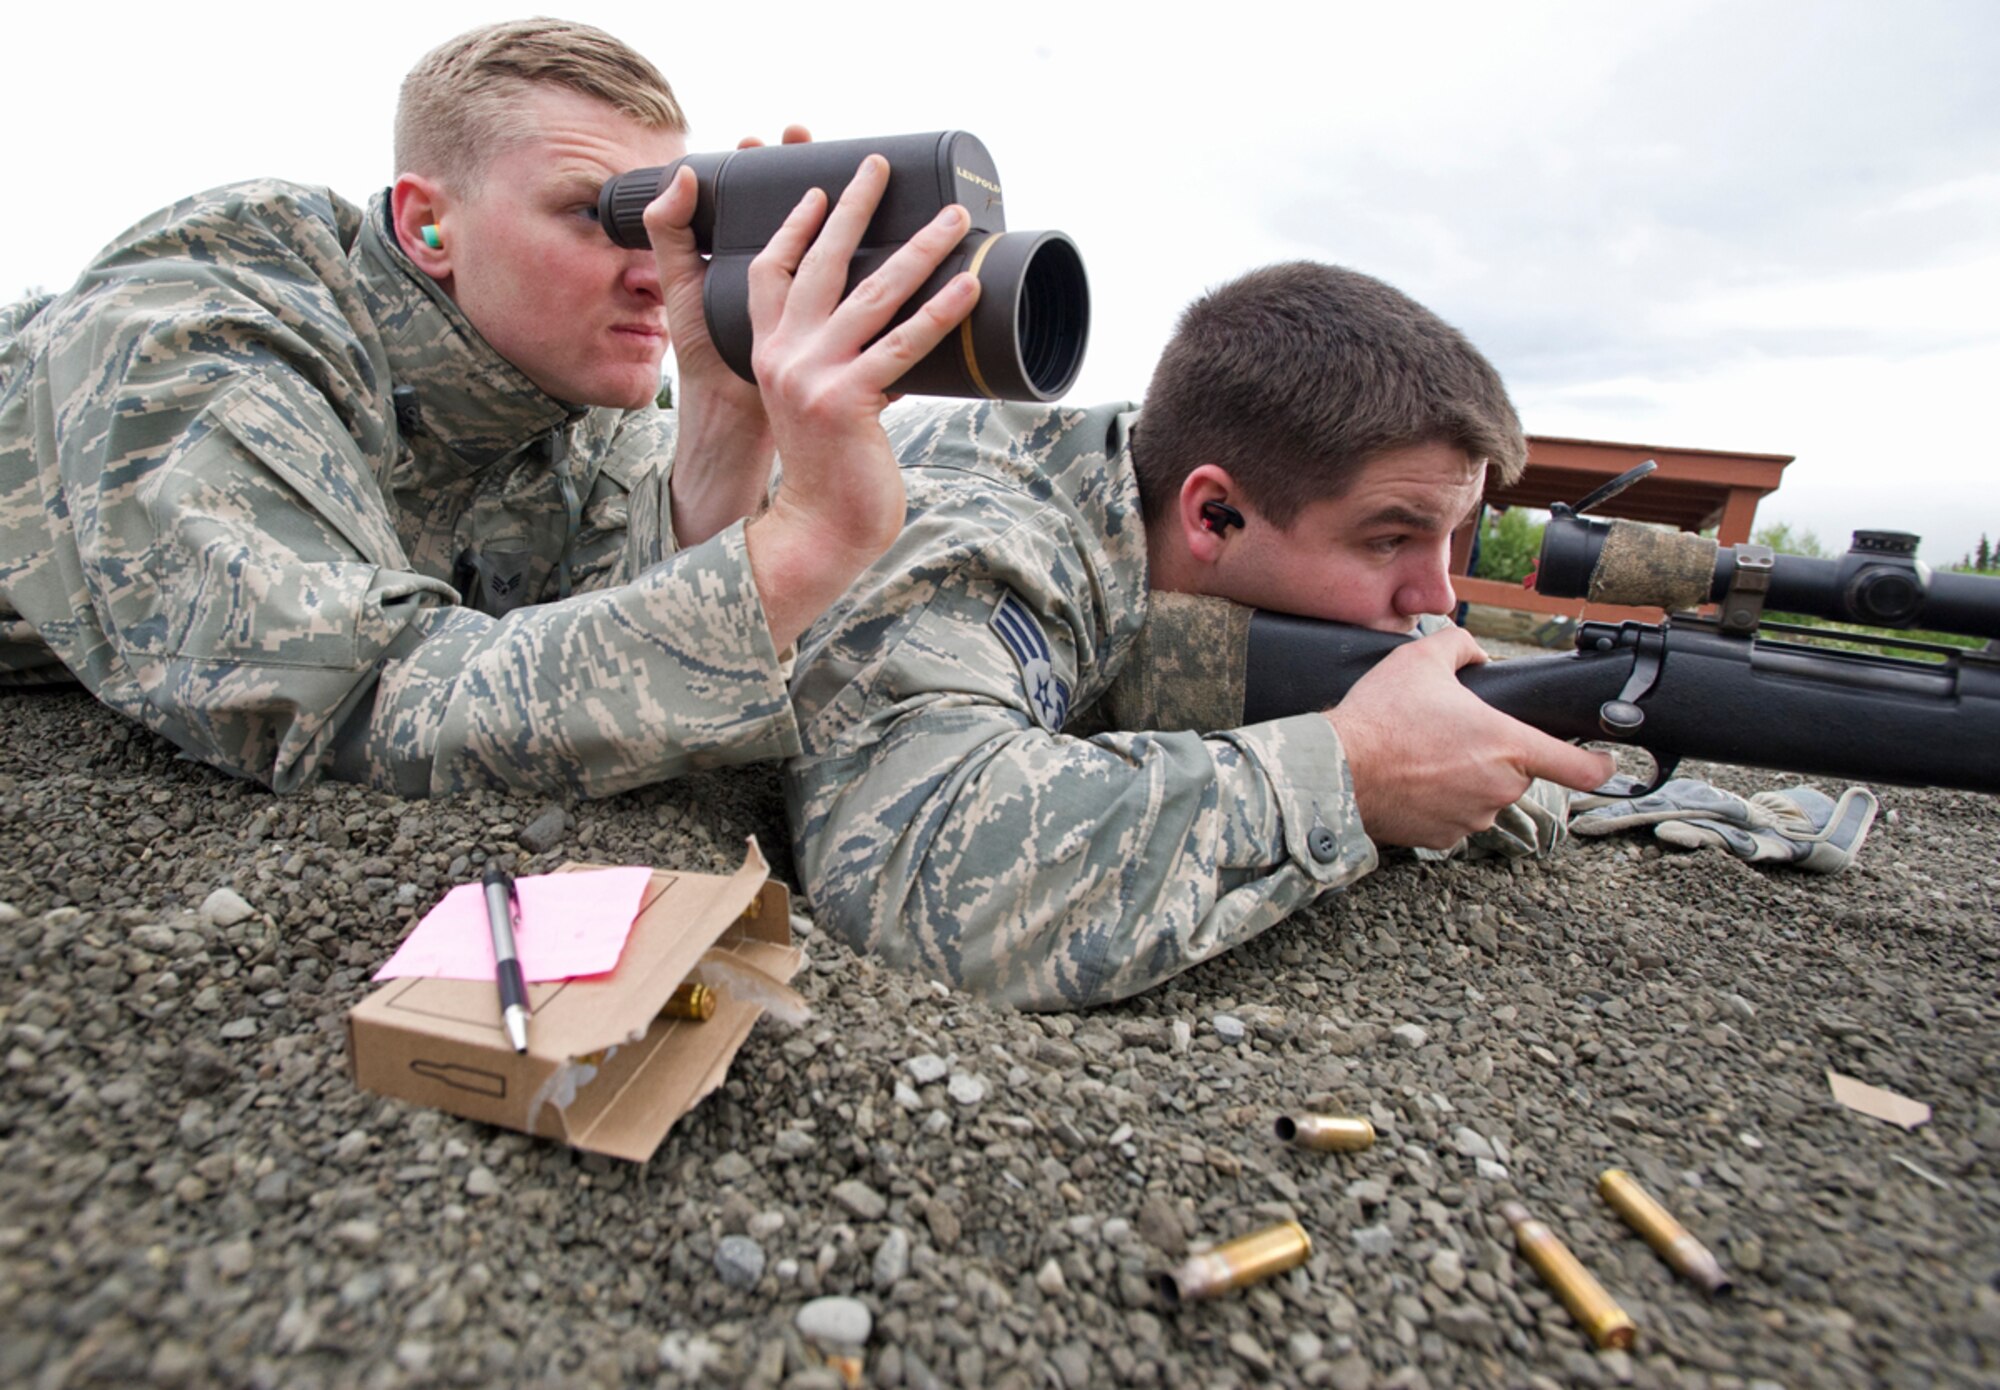 Senior Airman Aric Shott, left, uses a spotting scope to assist Senior Airman Austin Cavenaugh as they train with the M24 Sniper Weapon System July 11, 2014, at Joint Base Elmendorf-Richardson, Alaska. The M24 is a military version of the Remington Model 700, a 7.62 mm rifle, and has been in service with the U.S. military since 1988. Both Airmen are assigned to assigned to the 673rd Security Forces Squadron. Shott is a a native of West Palm Beach, Fla. Cavenaugh is a native of Beulaville, N.C. (U.S. Air Force photo/Justin Connaher)